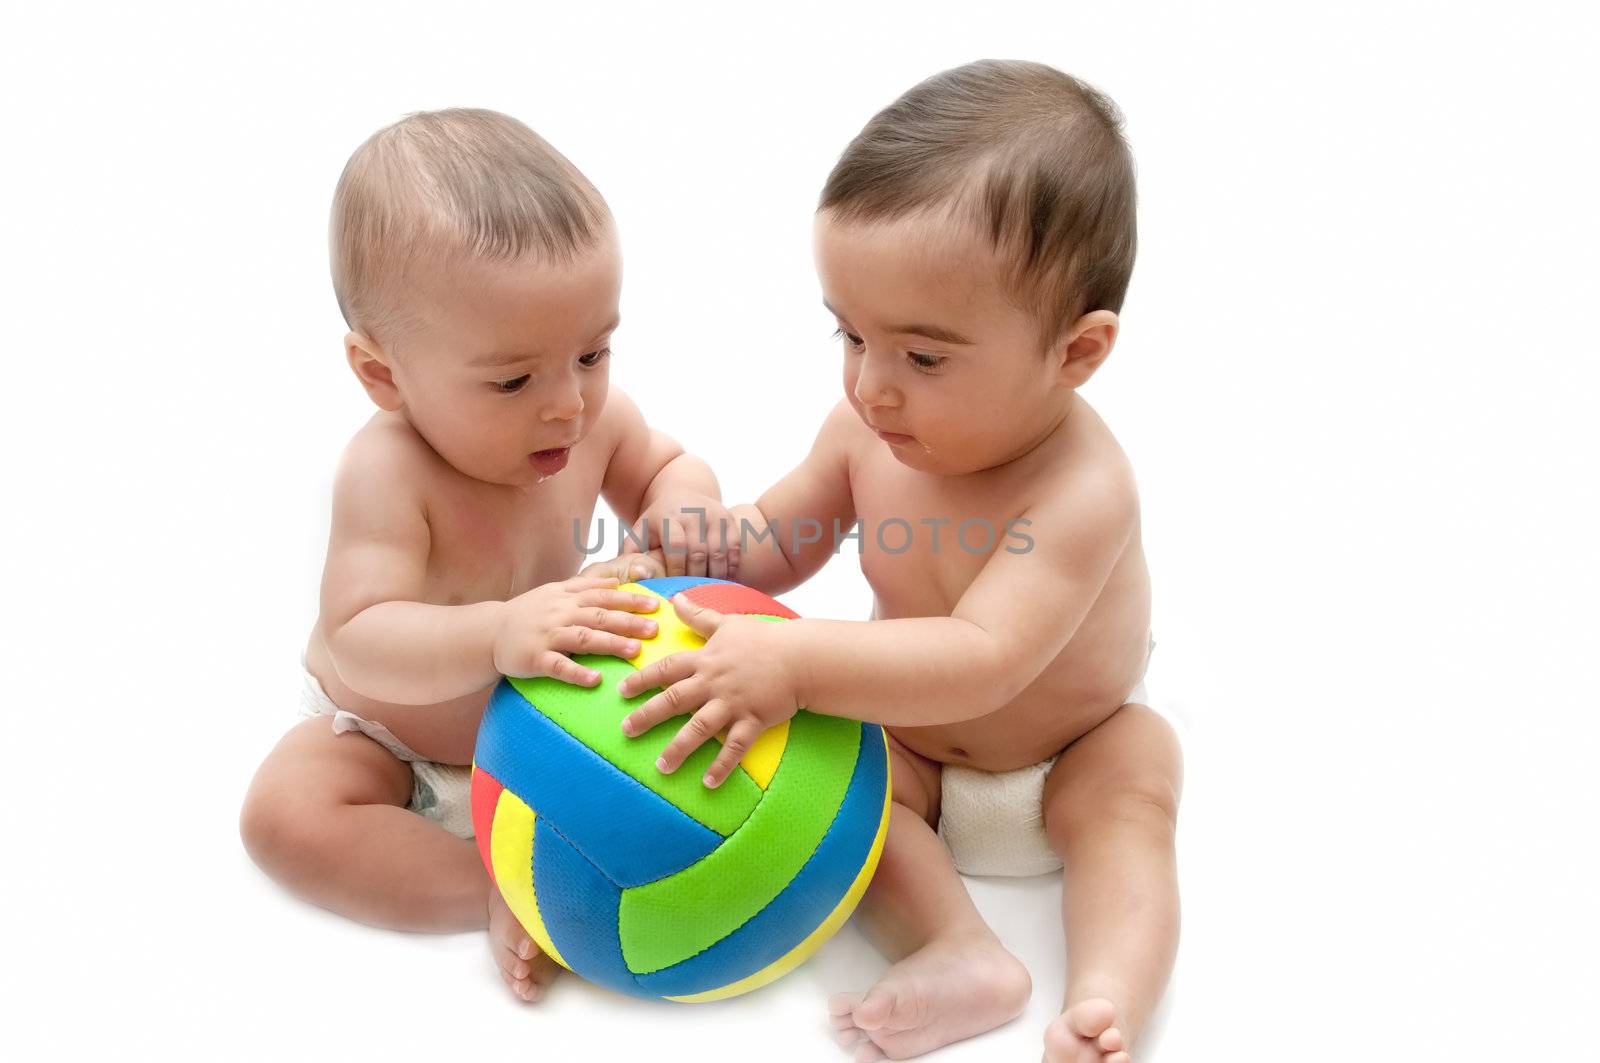 beautiful baby playing with a ball isolated on white background
